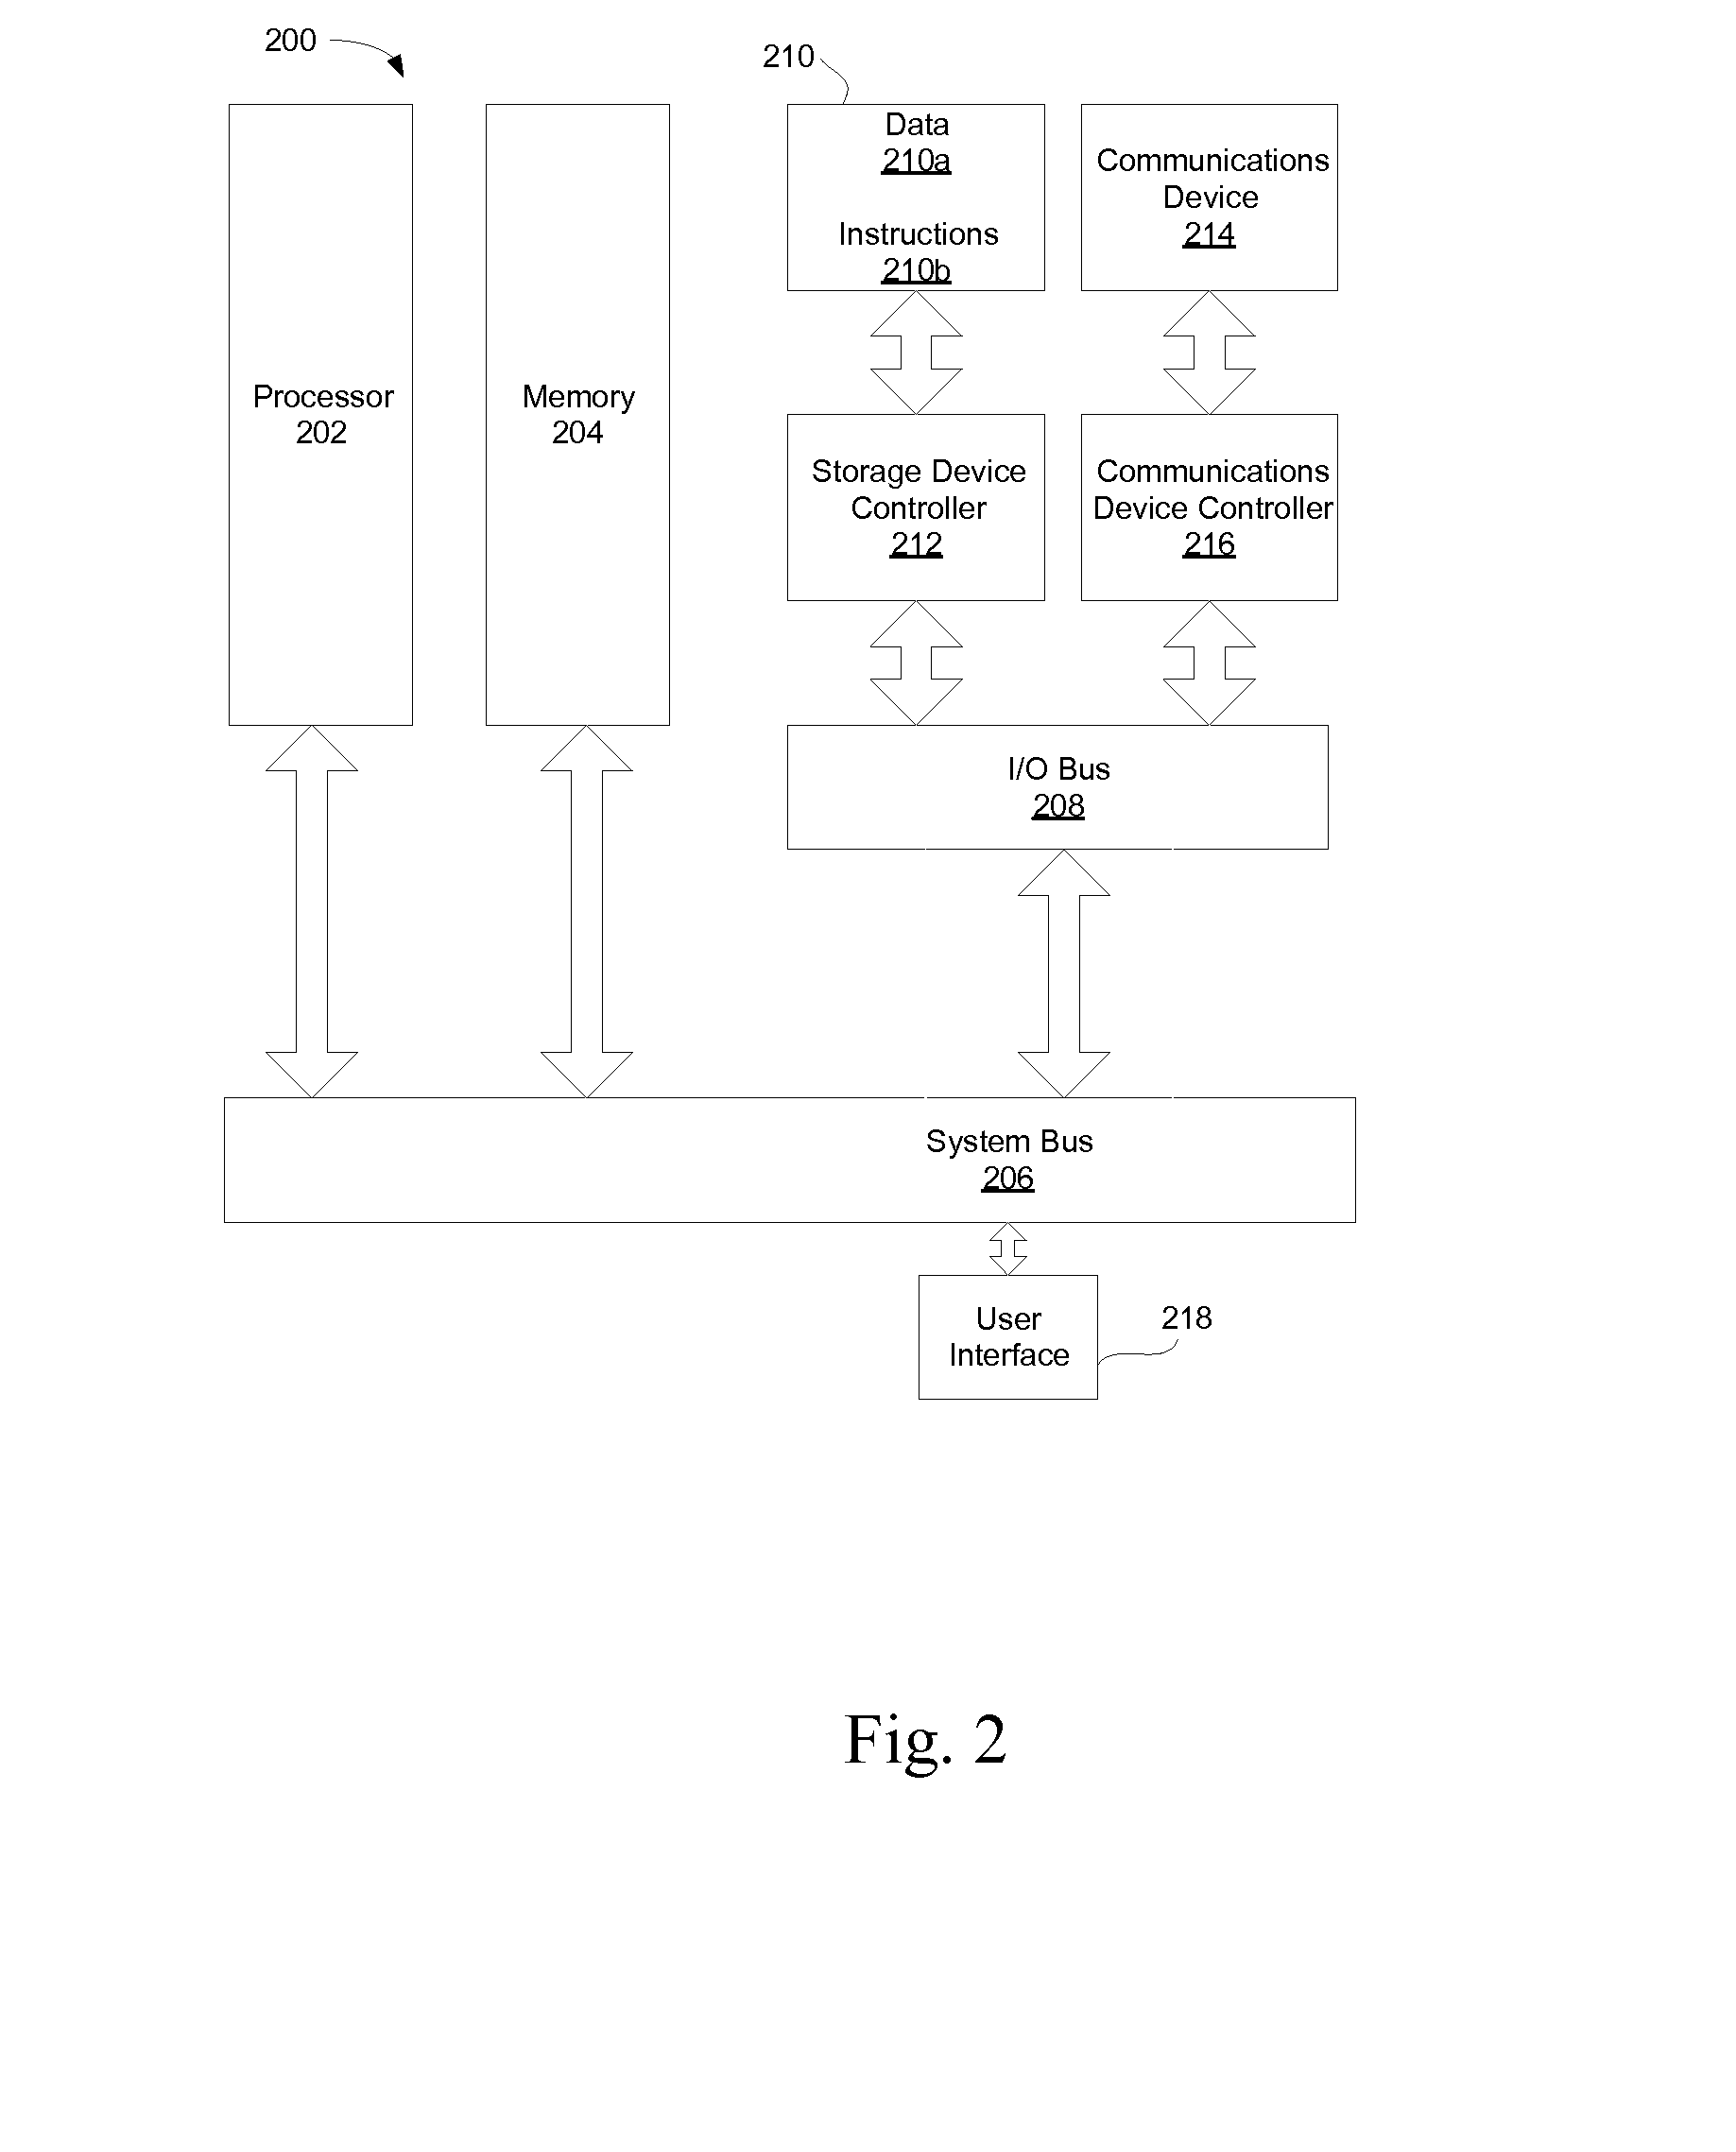 Procedure, apparatus, system, and computer program for network recovery